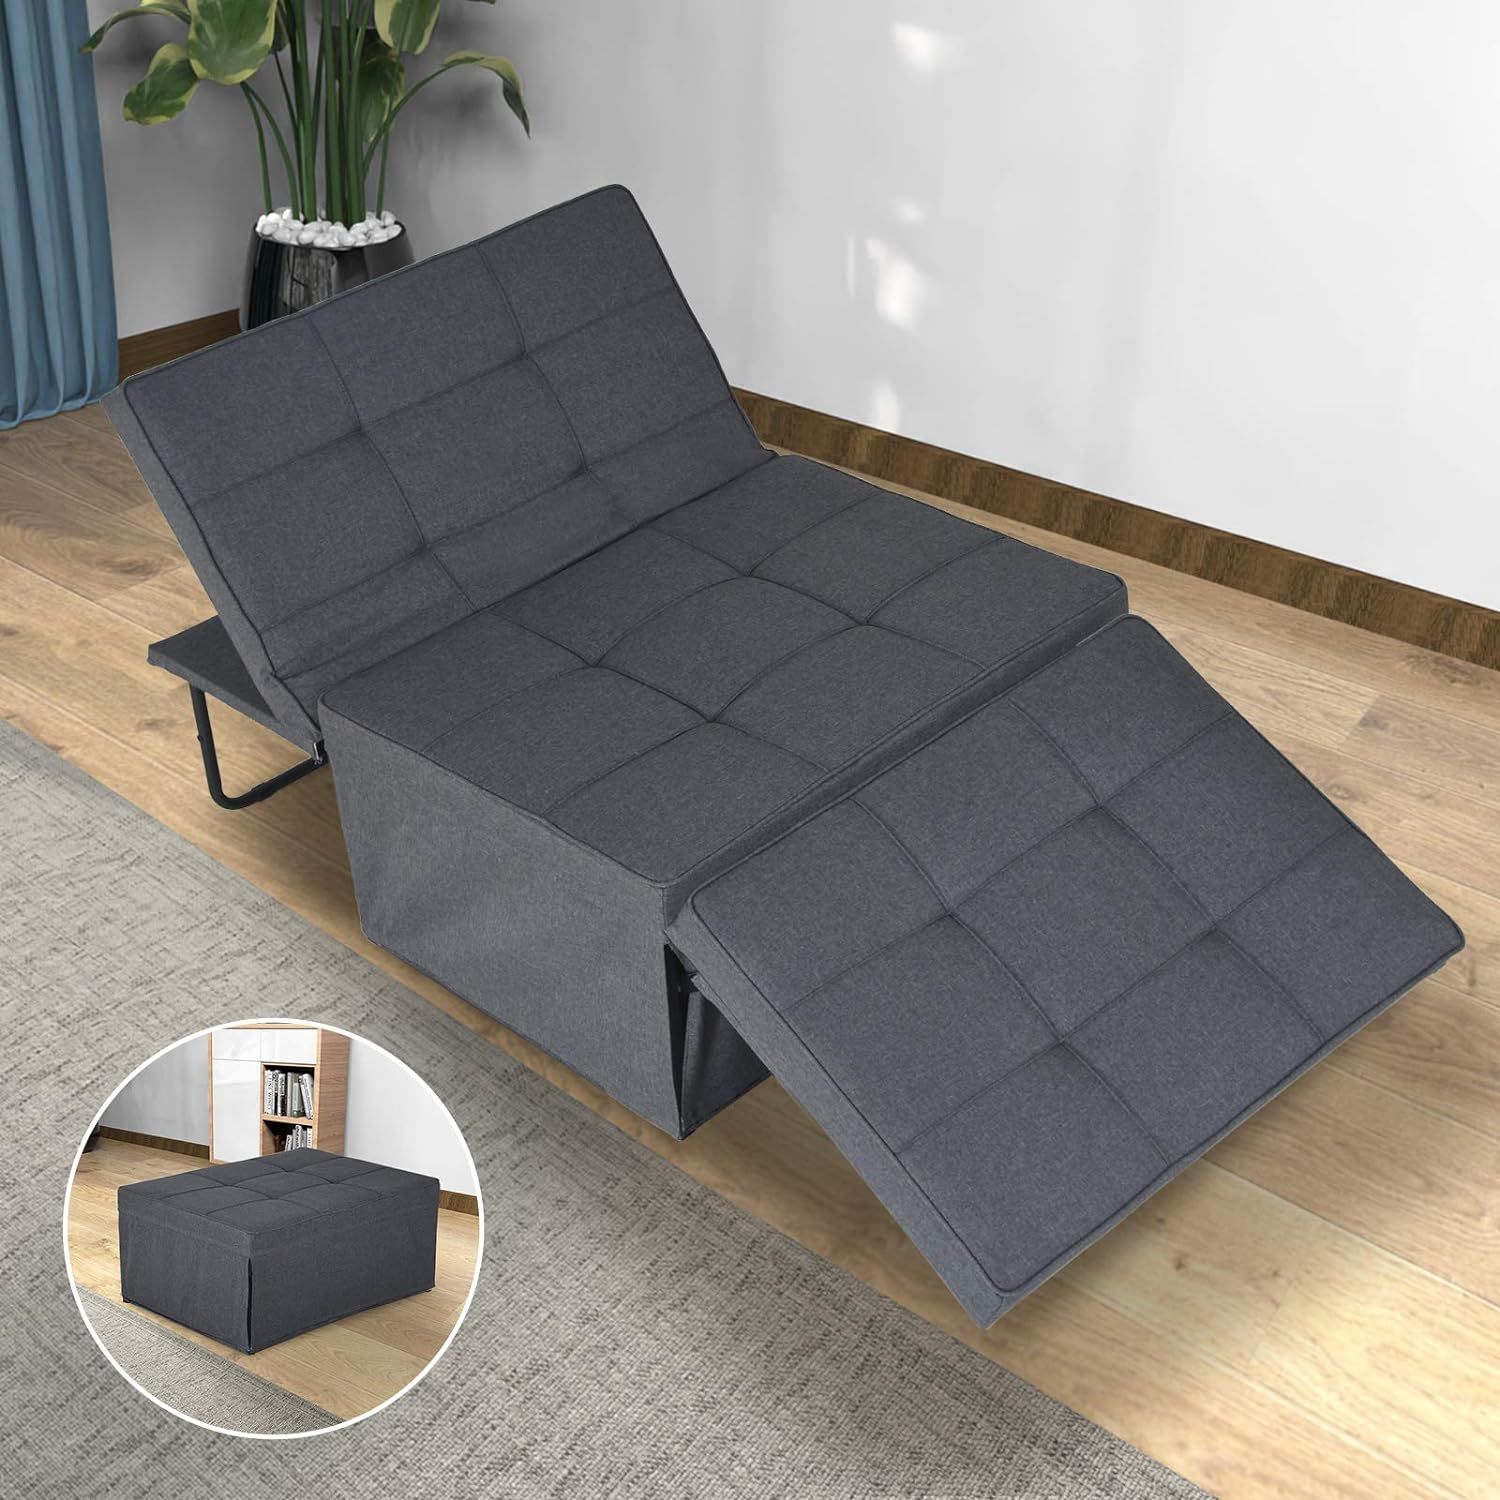 Sofa Bed, Sleeper Chair Bed, 4 In 1 Multi Function India | Ubuy Pertaining To 4 In 1 Convertible Sleeper Chair Beds (View 6 of 15)